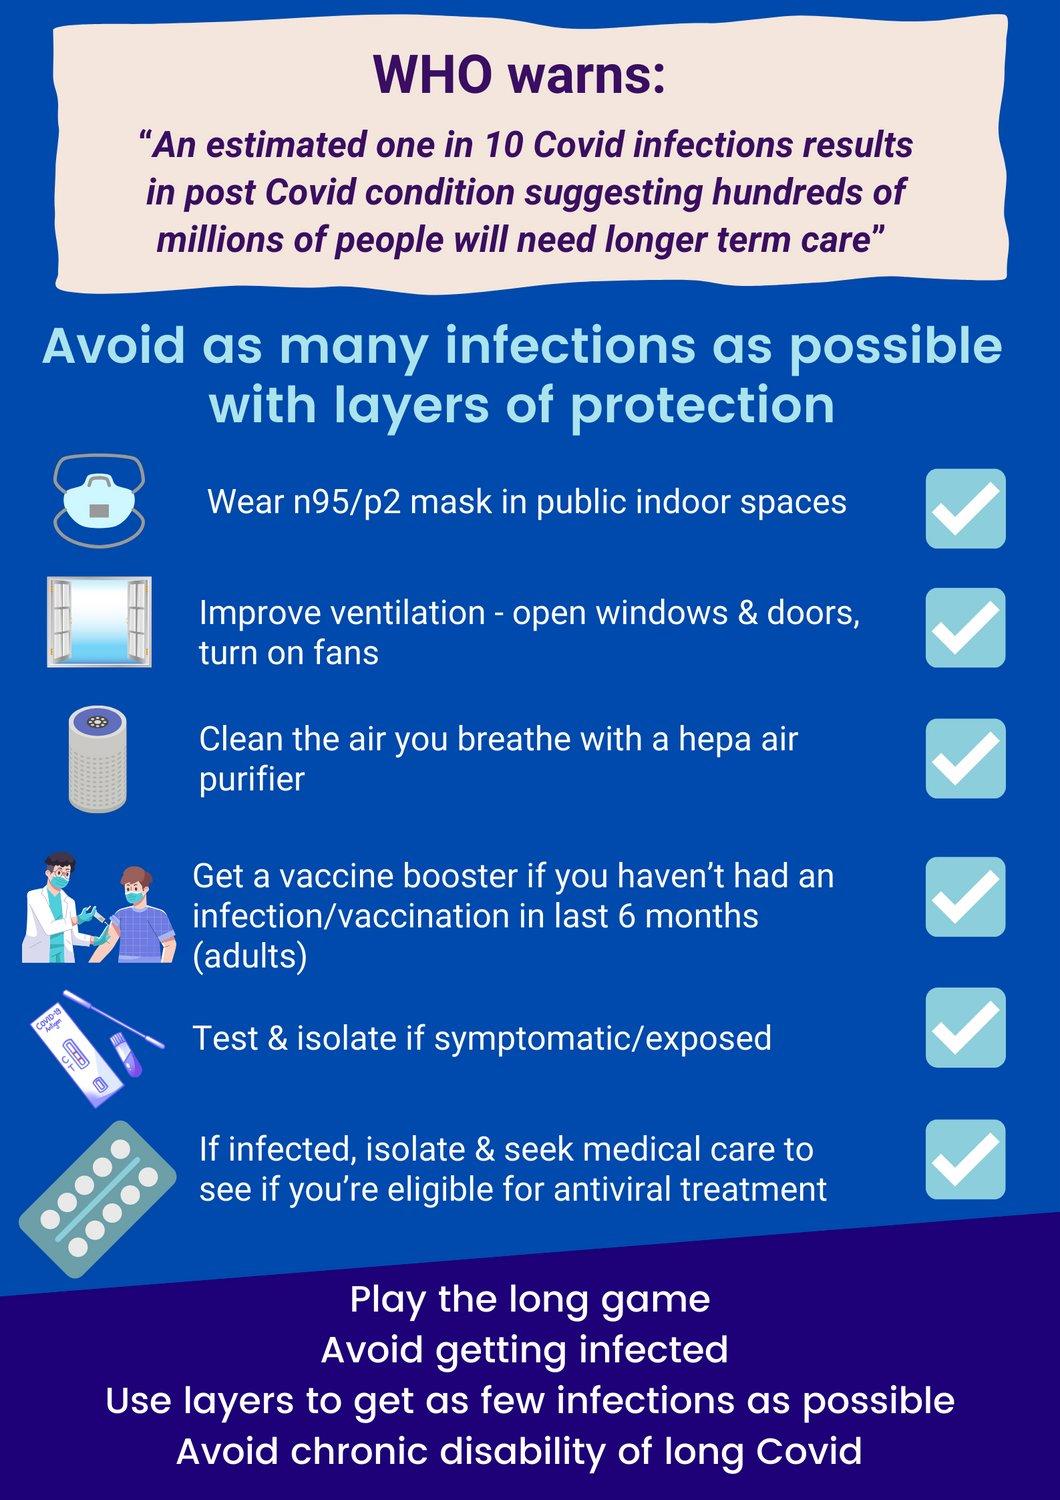 Infographic with many blue tones. A light peach coloured box at the top reads: "WHO Warns: 'An estimated one in 10 Covid infections results in post Covid condition suggesting hundreds of millions of people will need longer term care.'" Blue text reads: Avoid as many infections as possible with layers of protection. Then a list of protective measures: 1) A picture of mask with text: "Wear n95/p2 mask in public indoor spaces" 2) A picture of a window with text: "Improve ventilation - open windows & doors, turn on fans" 3) A picture of a filter with text: "Clean the air you breathe with a hepa air purifier" 4) Picture of 2 people - 1 administering vaccine to another with text: "Get a vaccine booster if you haven't had an infection/vaccination in the last 6 months (adults) 5) A picture of a Covid test with text: "Test & isolate if symptomatic/exposed.  6) A picture of medication with text: "If infected, isolate & seek medical care to see if you're eligible for antiviral treatment. Play the long game. Avoid getting infected. Use layers to get as few infections as possible. Avoid chronic disability of long Covid